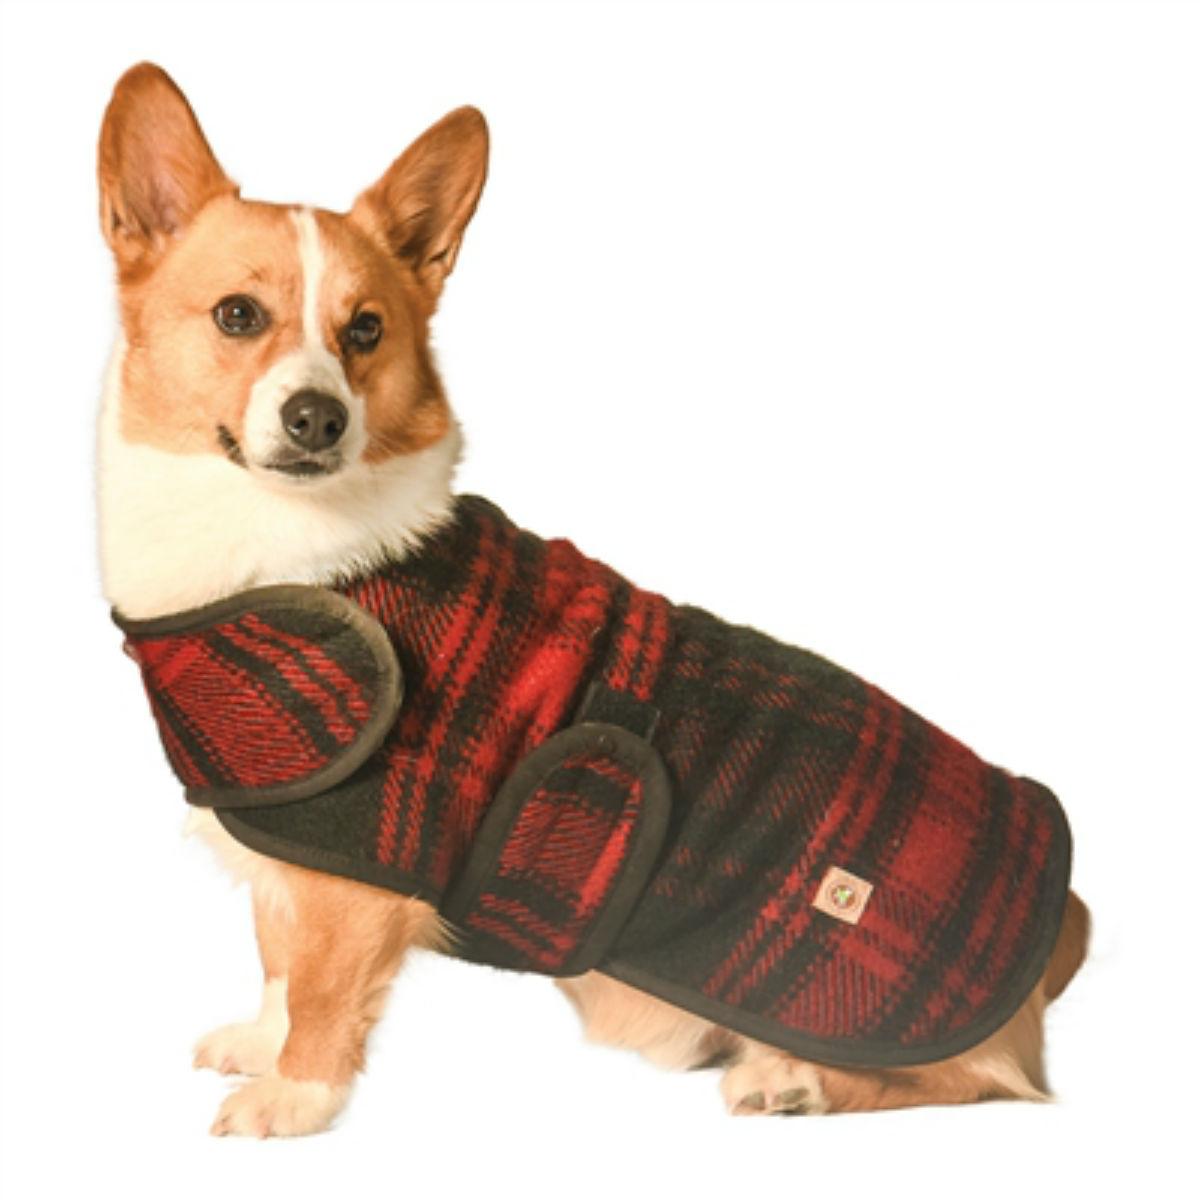 Chilly Dog Plaid Blanket Dog Coat - Red and Black